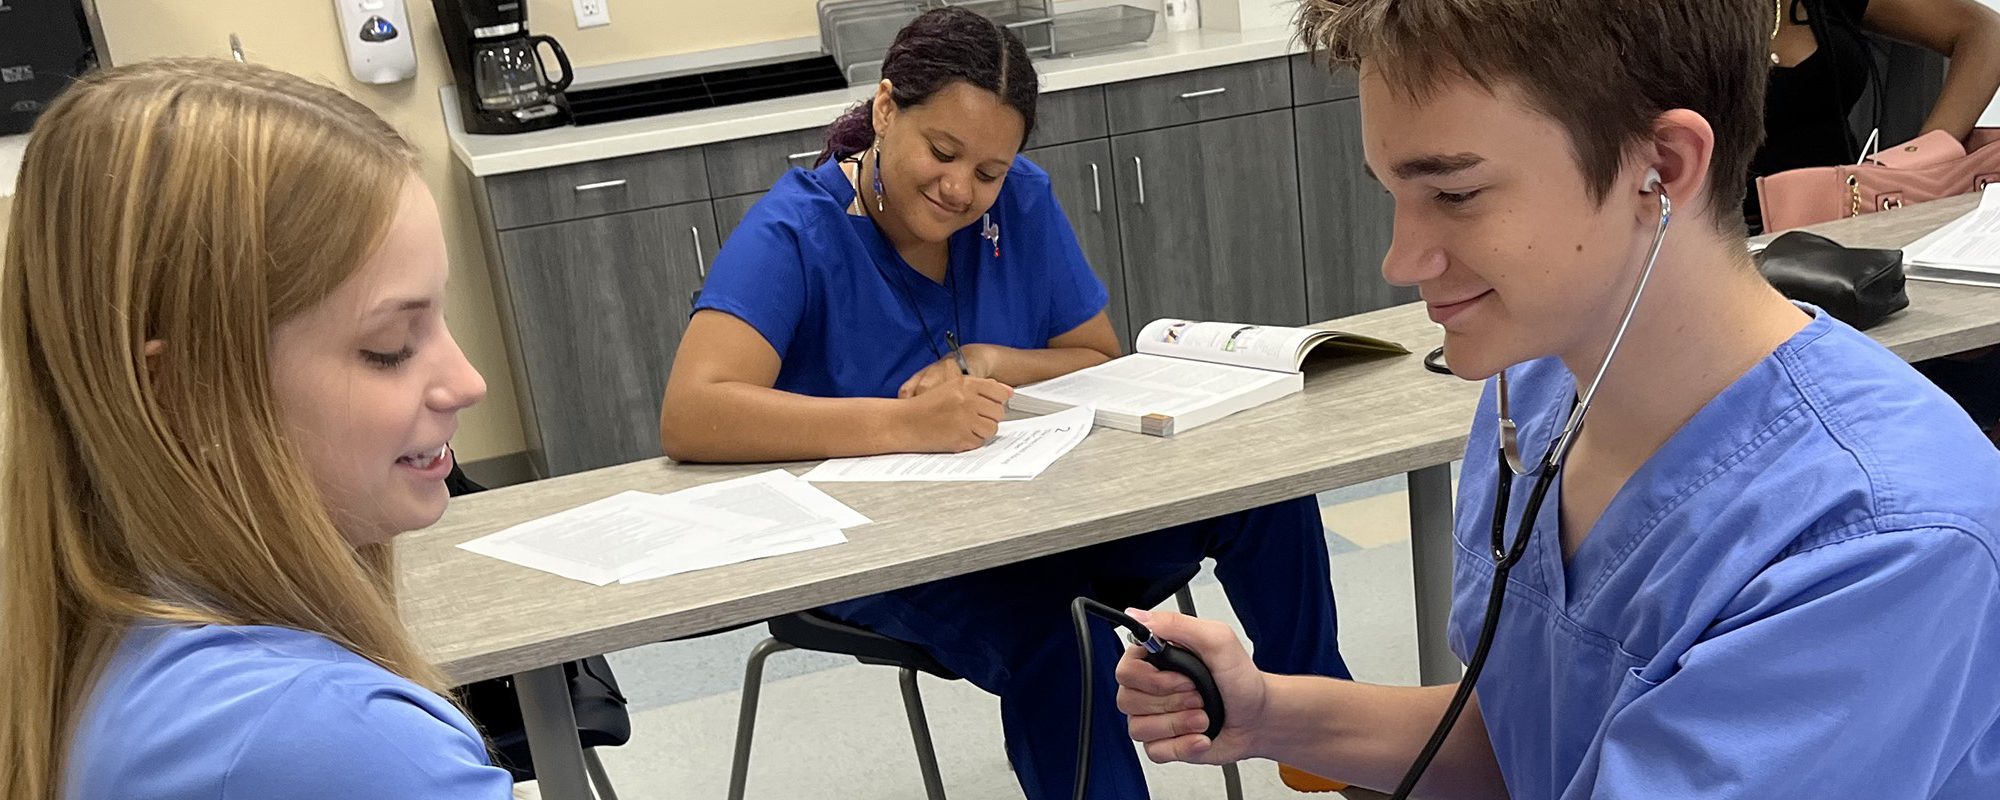 One student listens to another's heartrate while checking that person's blood pressure during a classroom exercise. Another student smiles while taking notes in the background.